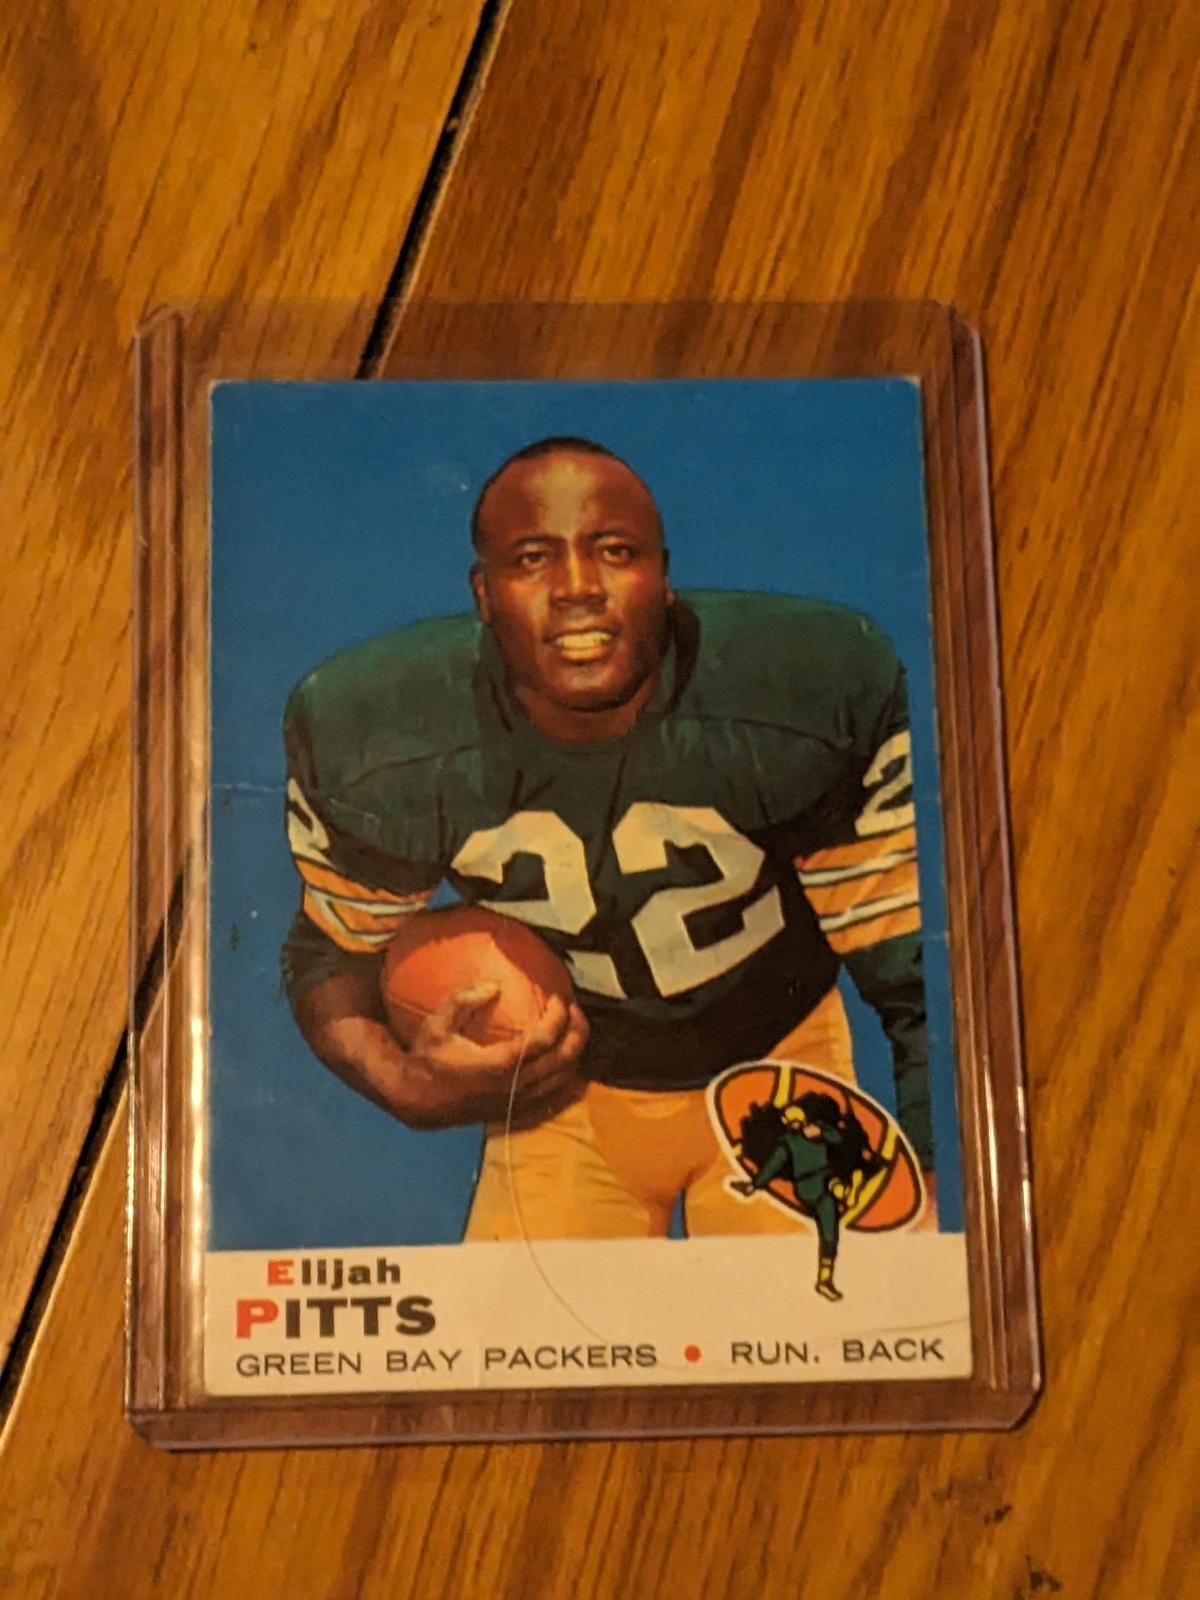 1969 Topps #102 Elijah Pitts Green Bay Packers Vintage